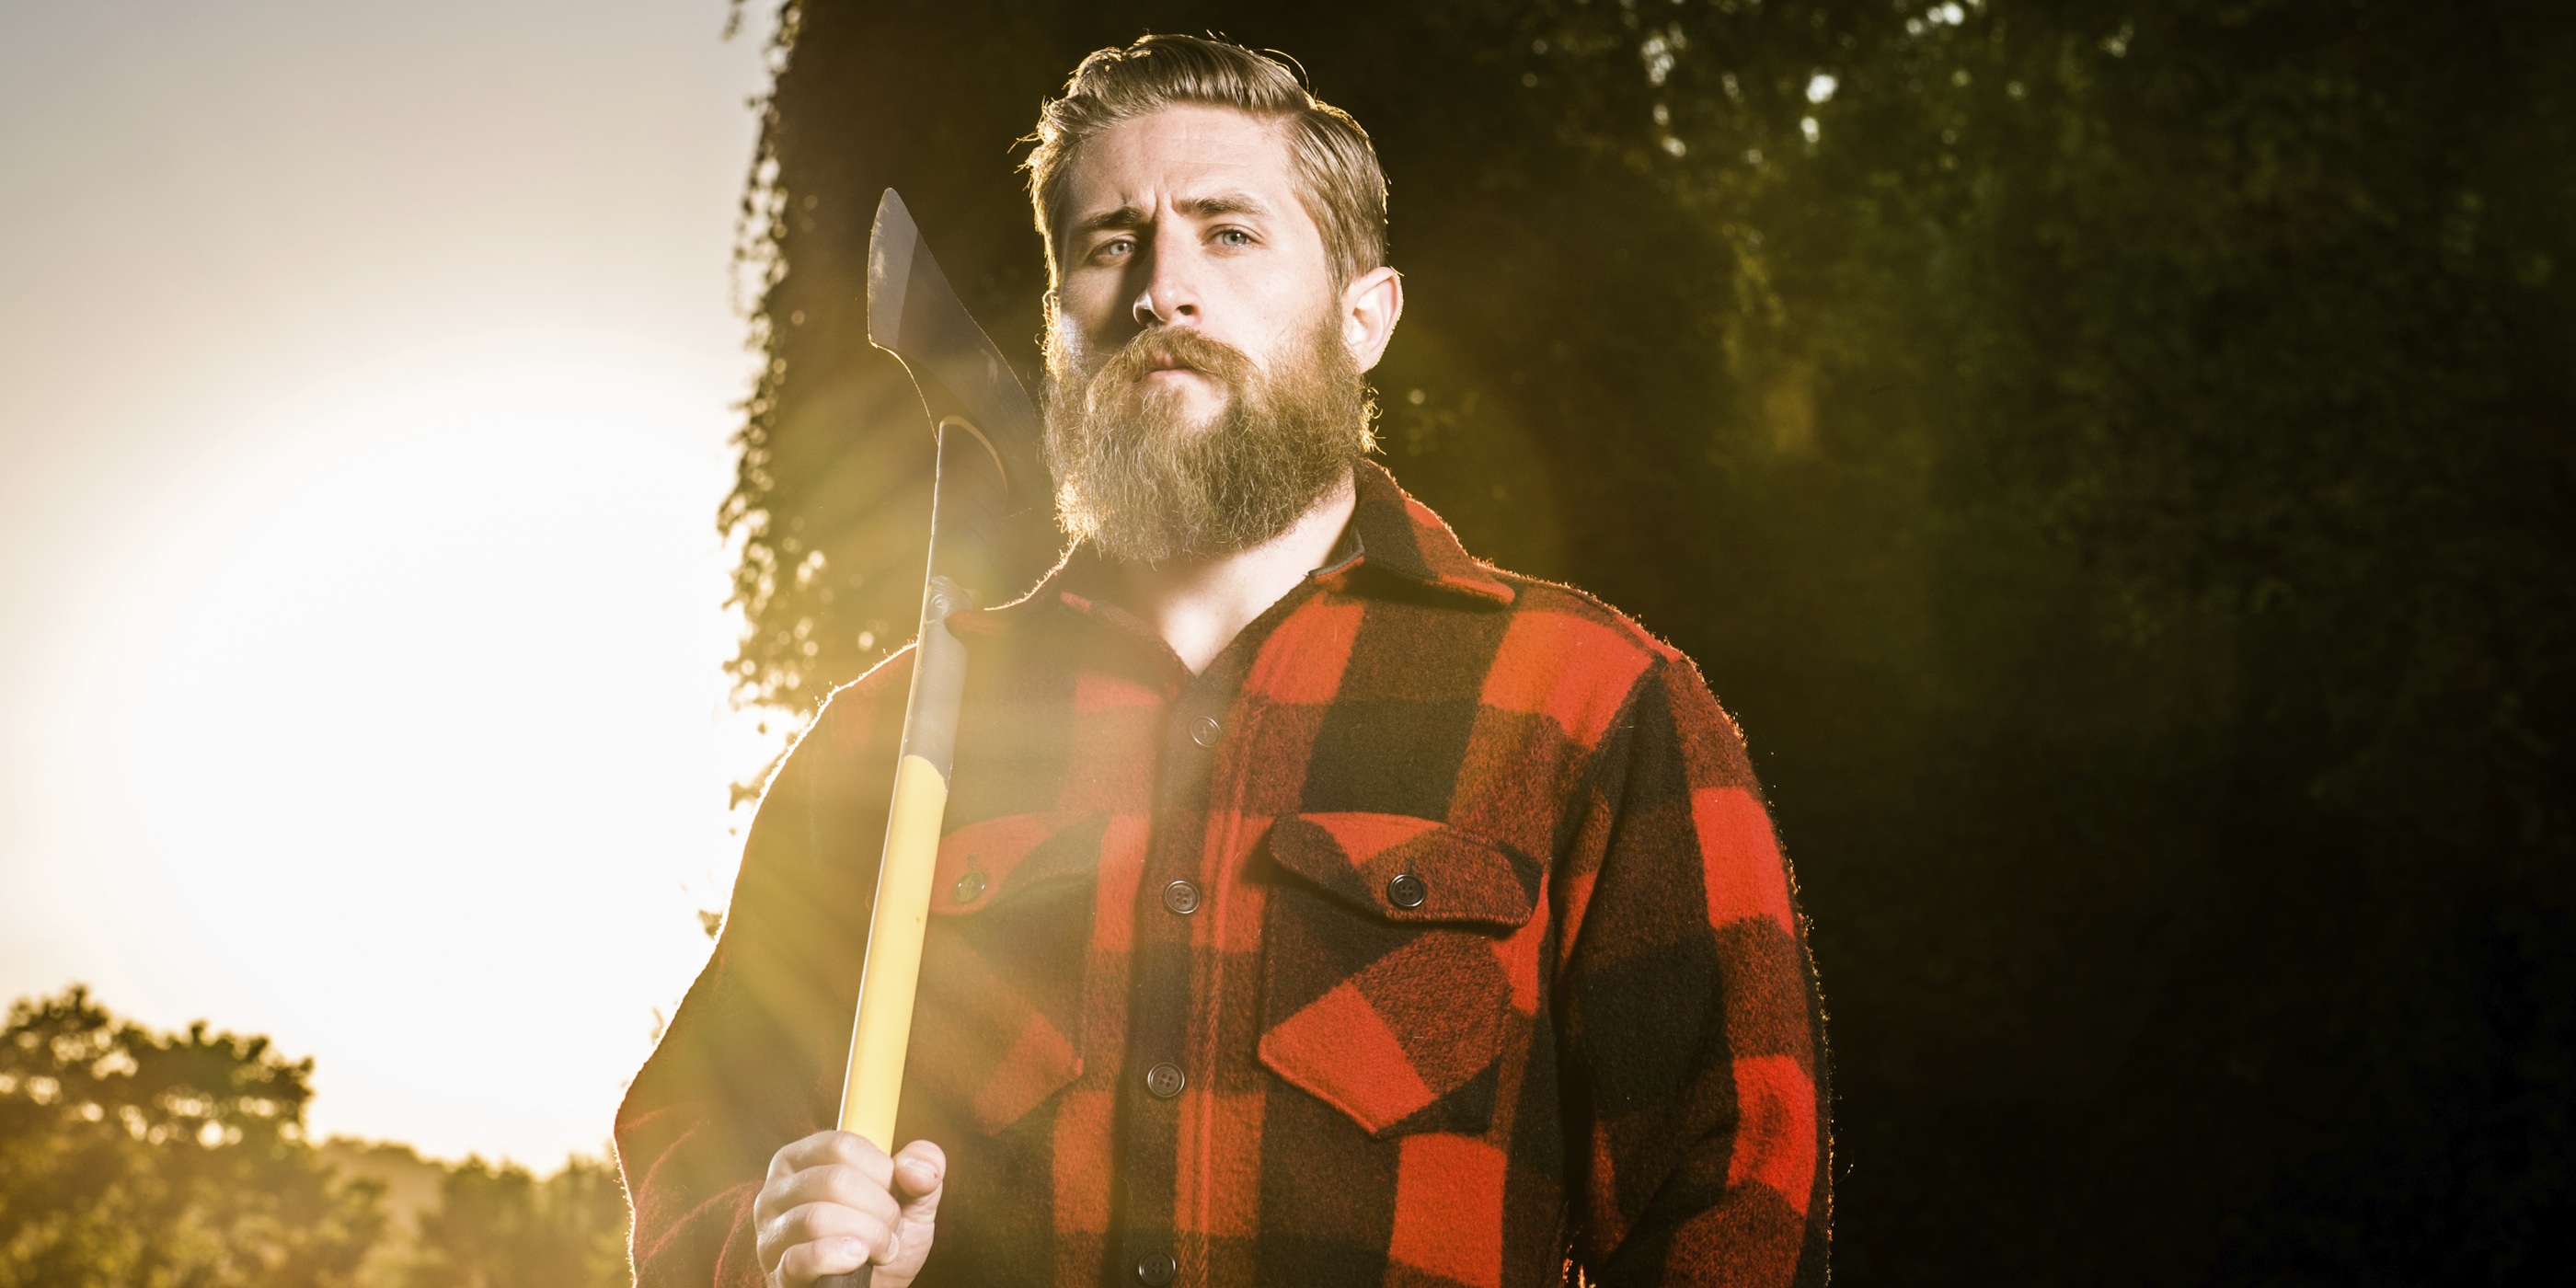 Image source: http://www.thebolditalic.com/articles/6235-the-lumbersexual-is-here-to-chop-down-metrosexuals